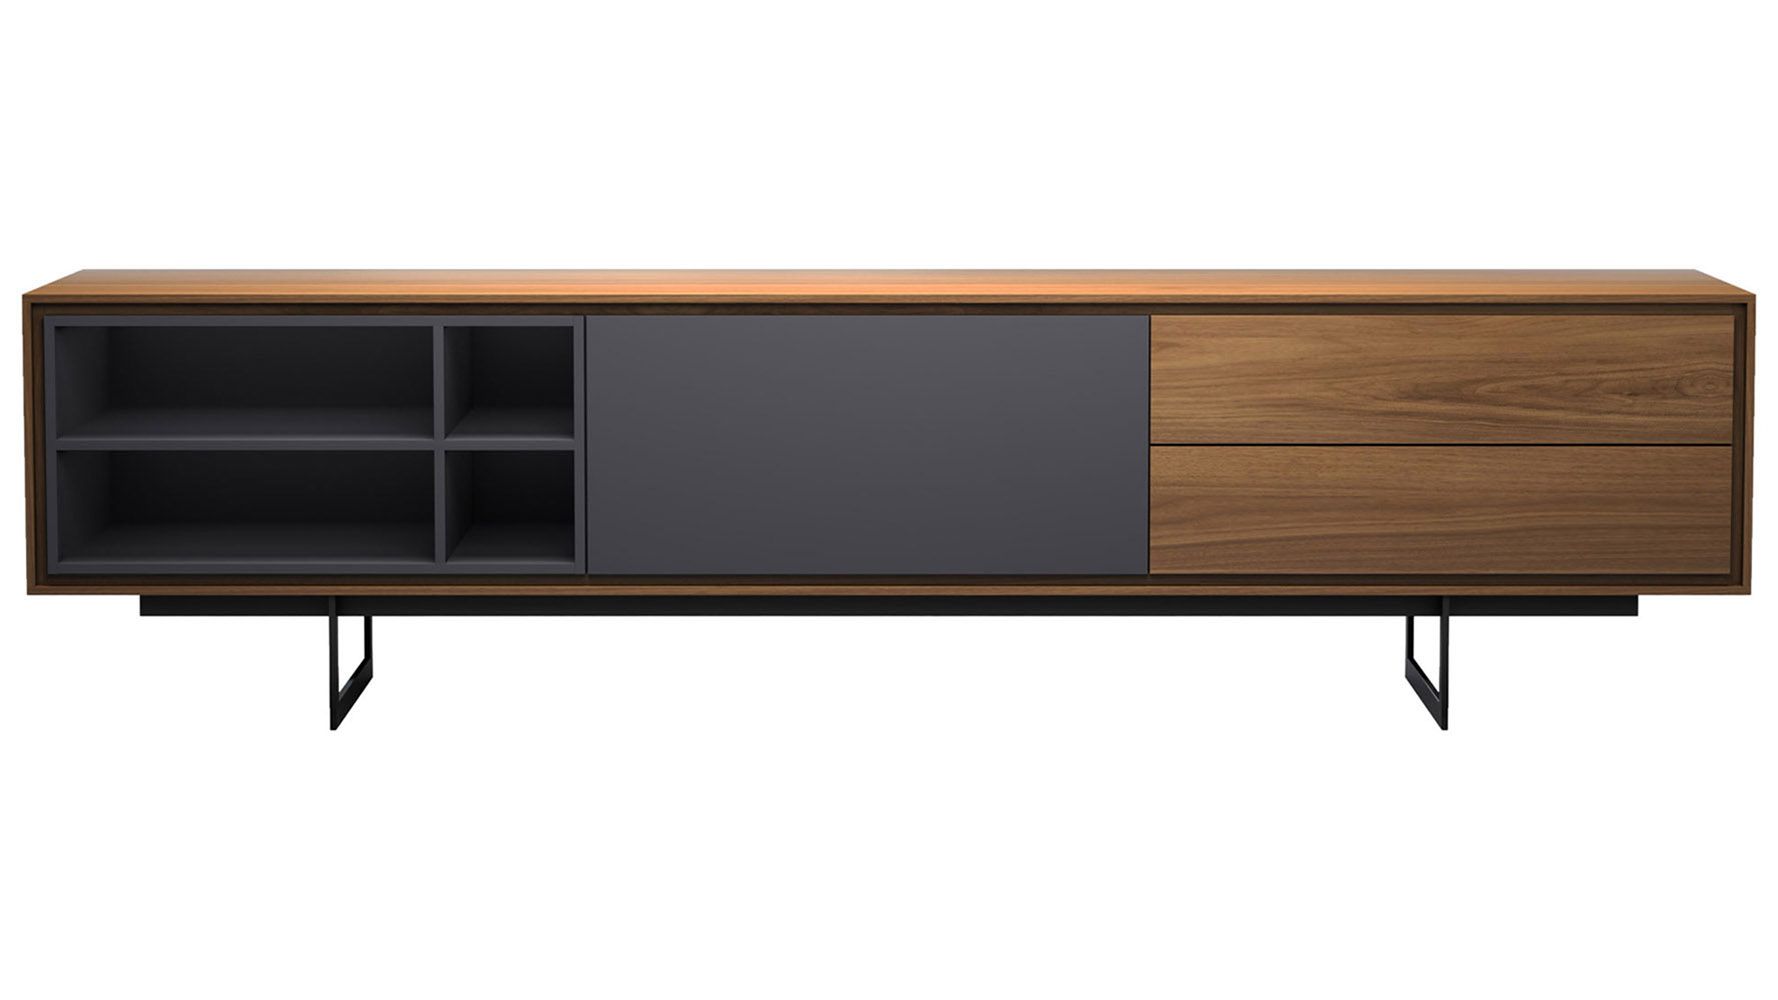 Wright Media Cabinet With Regard To Festival Eclipse Credenzas (View 13 of 30)